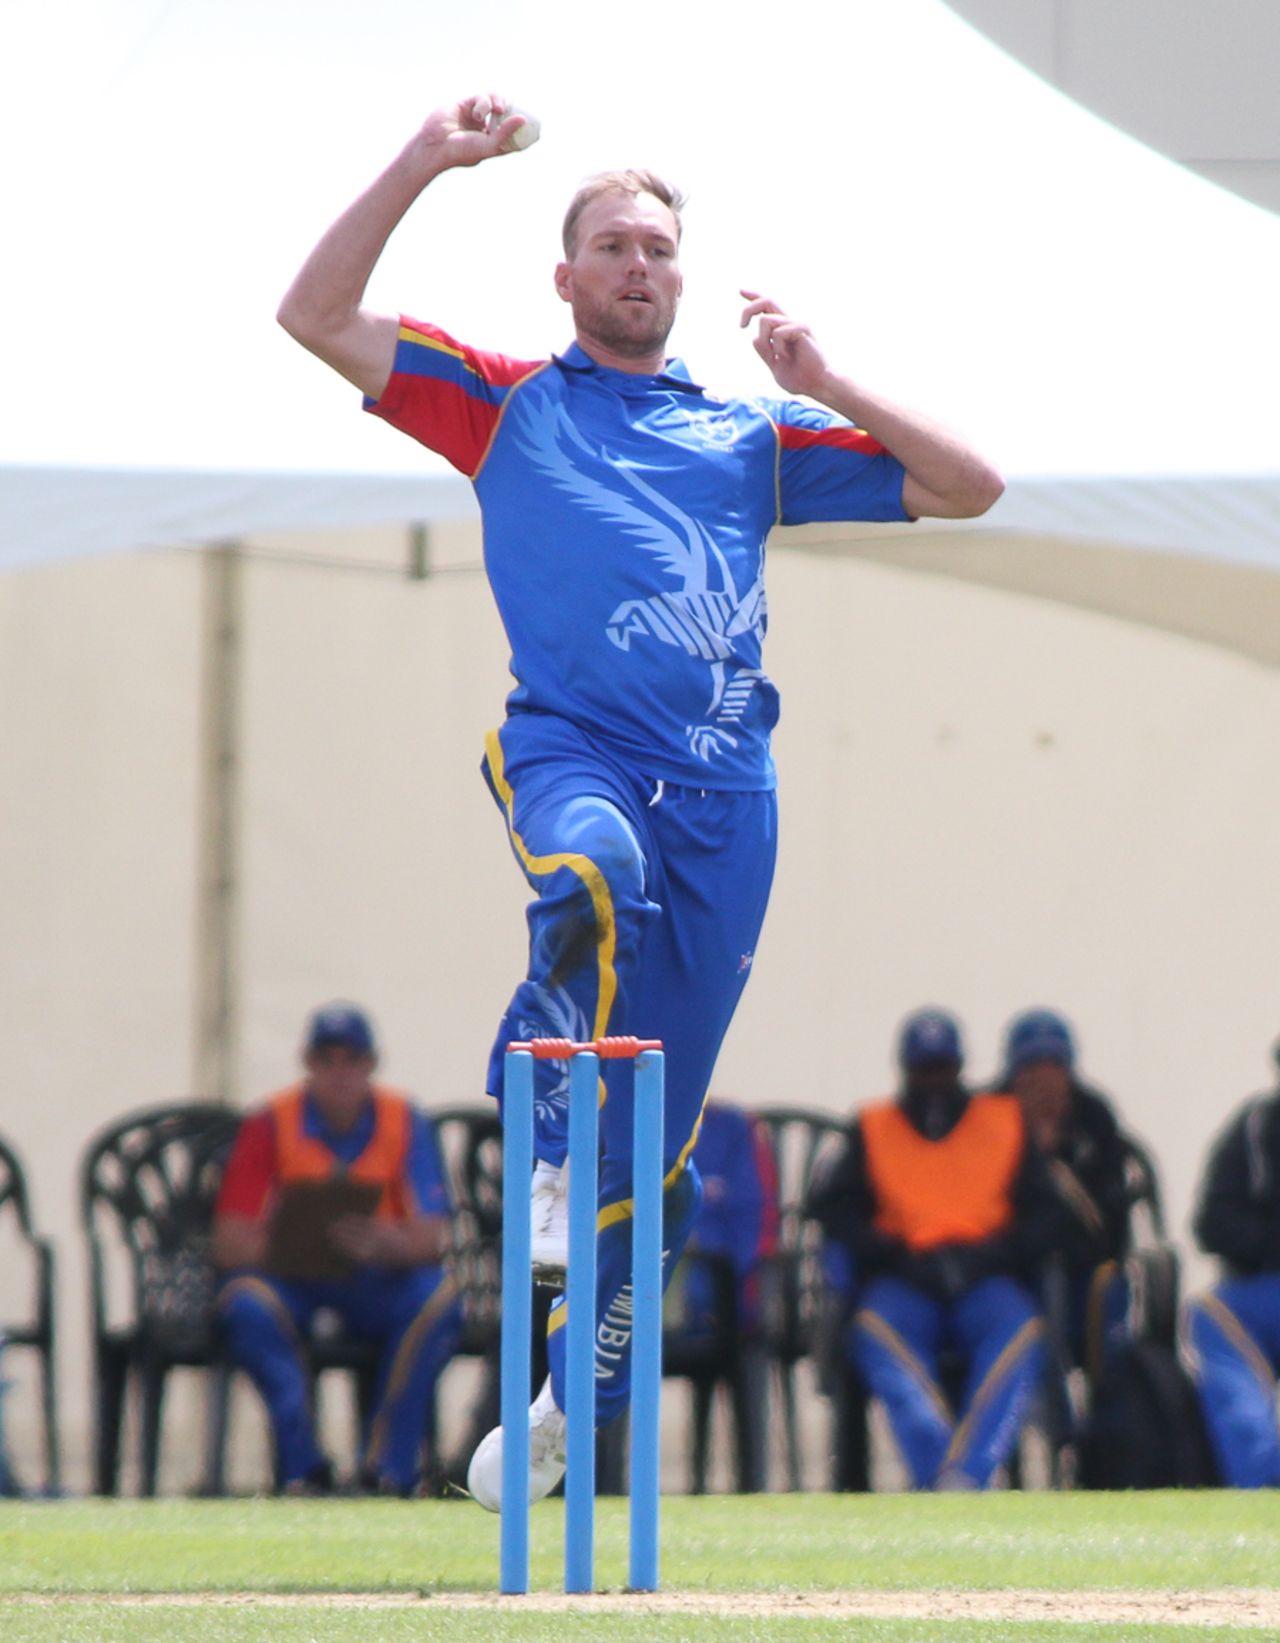 Christi Viljoen took two wickets in his opening over, Scotland v Namibia, ICC WCL Championship, Edinburgh, June 11, 2017 